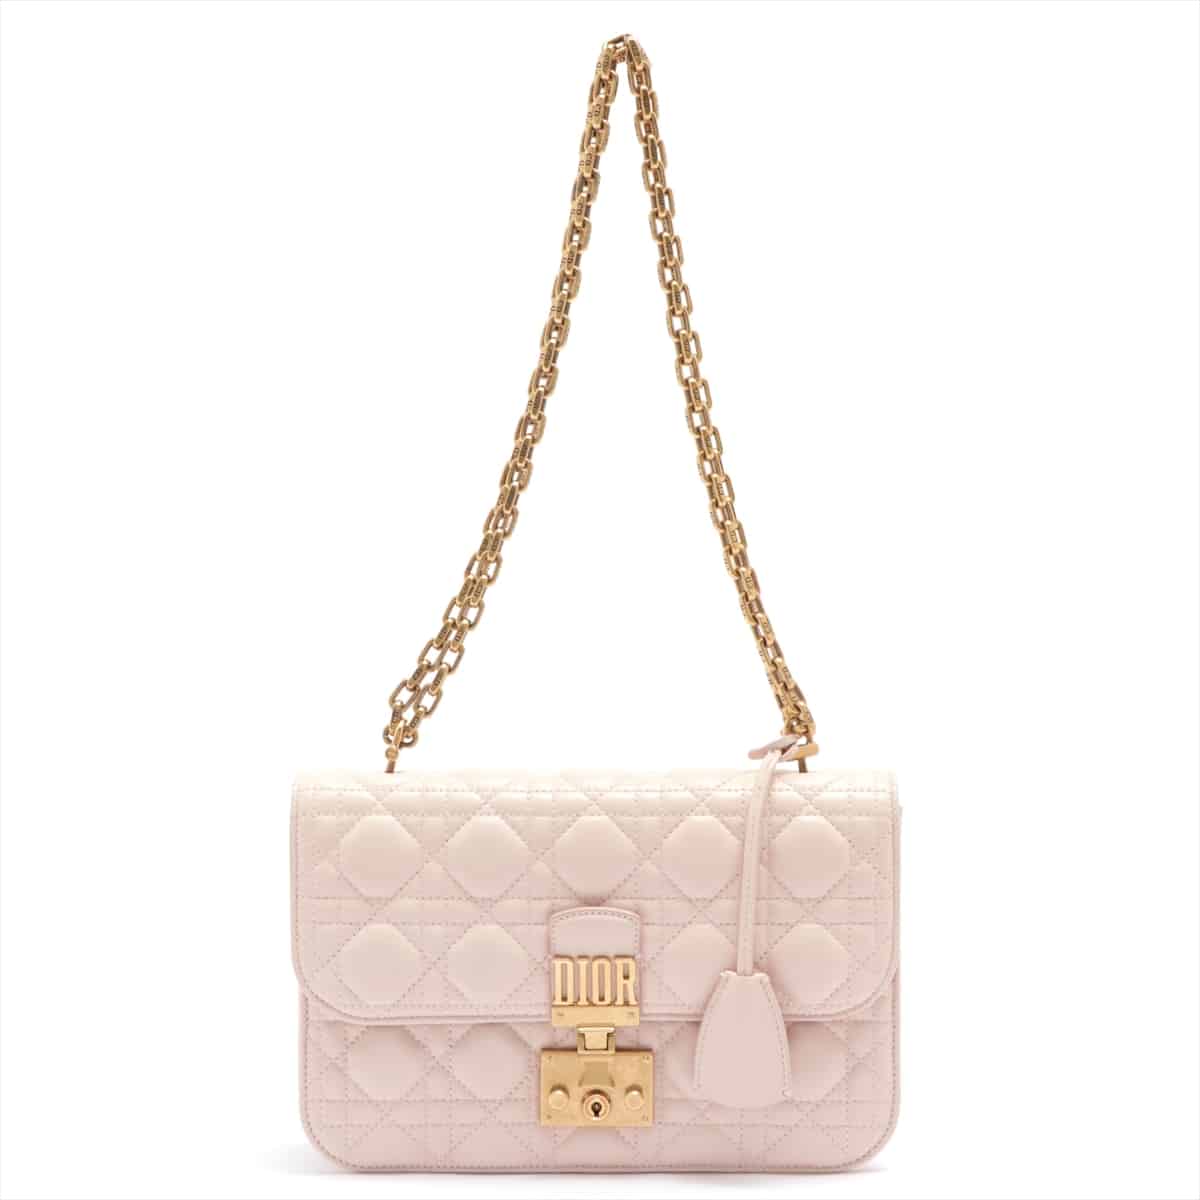 Christian Dior Dior Addict Cannage Leather Chain shoulder bag Pink open papers